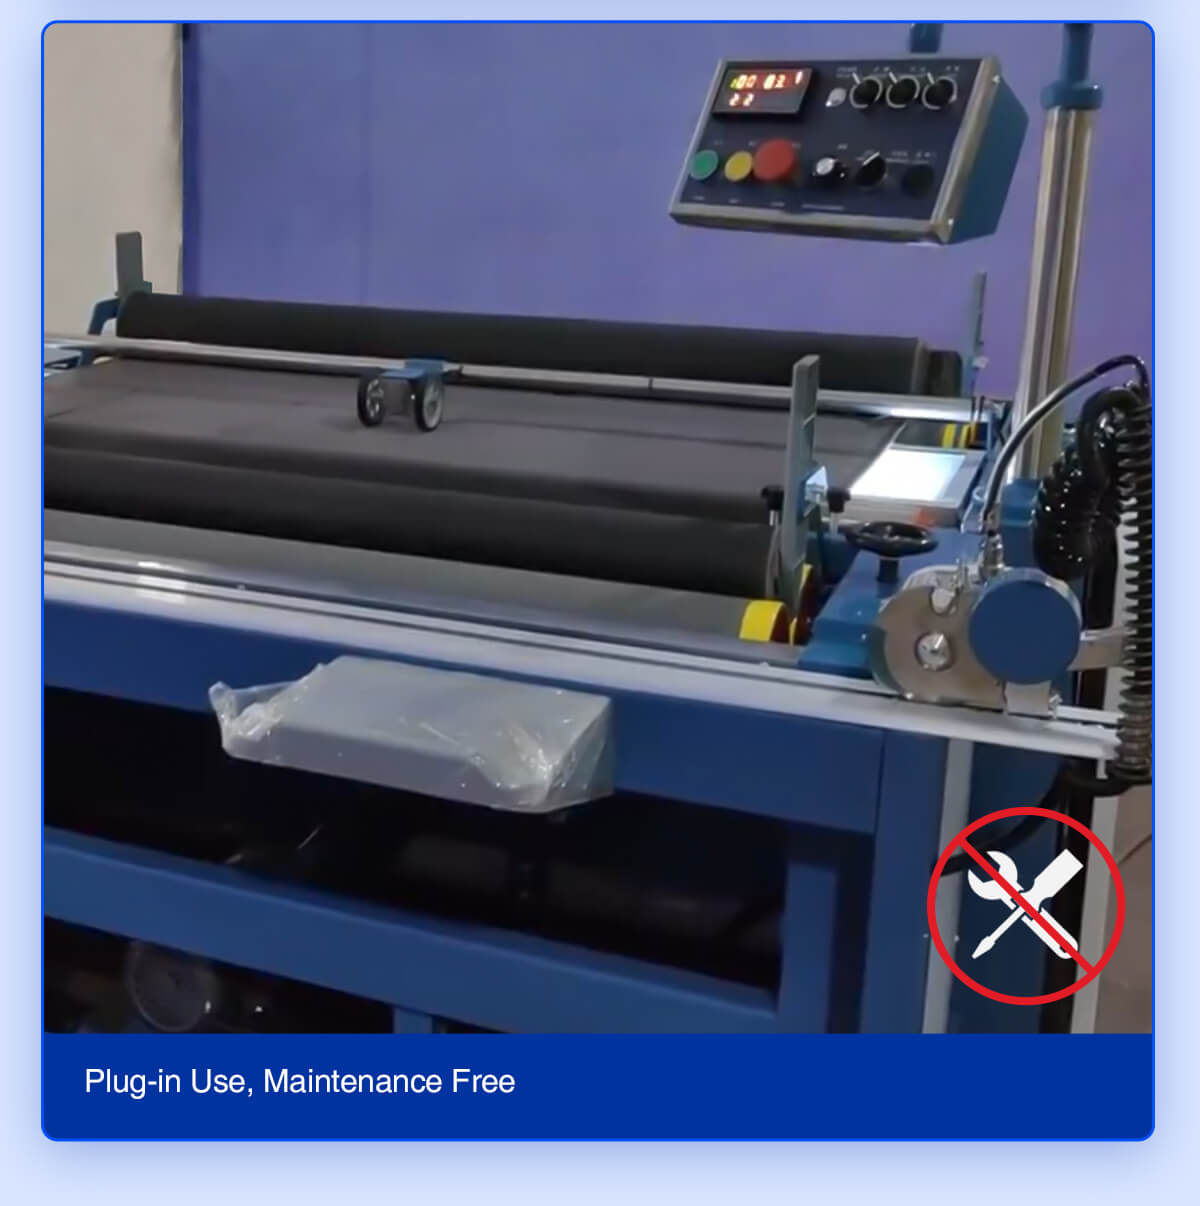 Table Type Fabric Measuring & Inspection Machine plug-in use, maintenance free